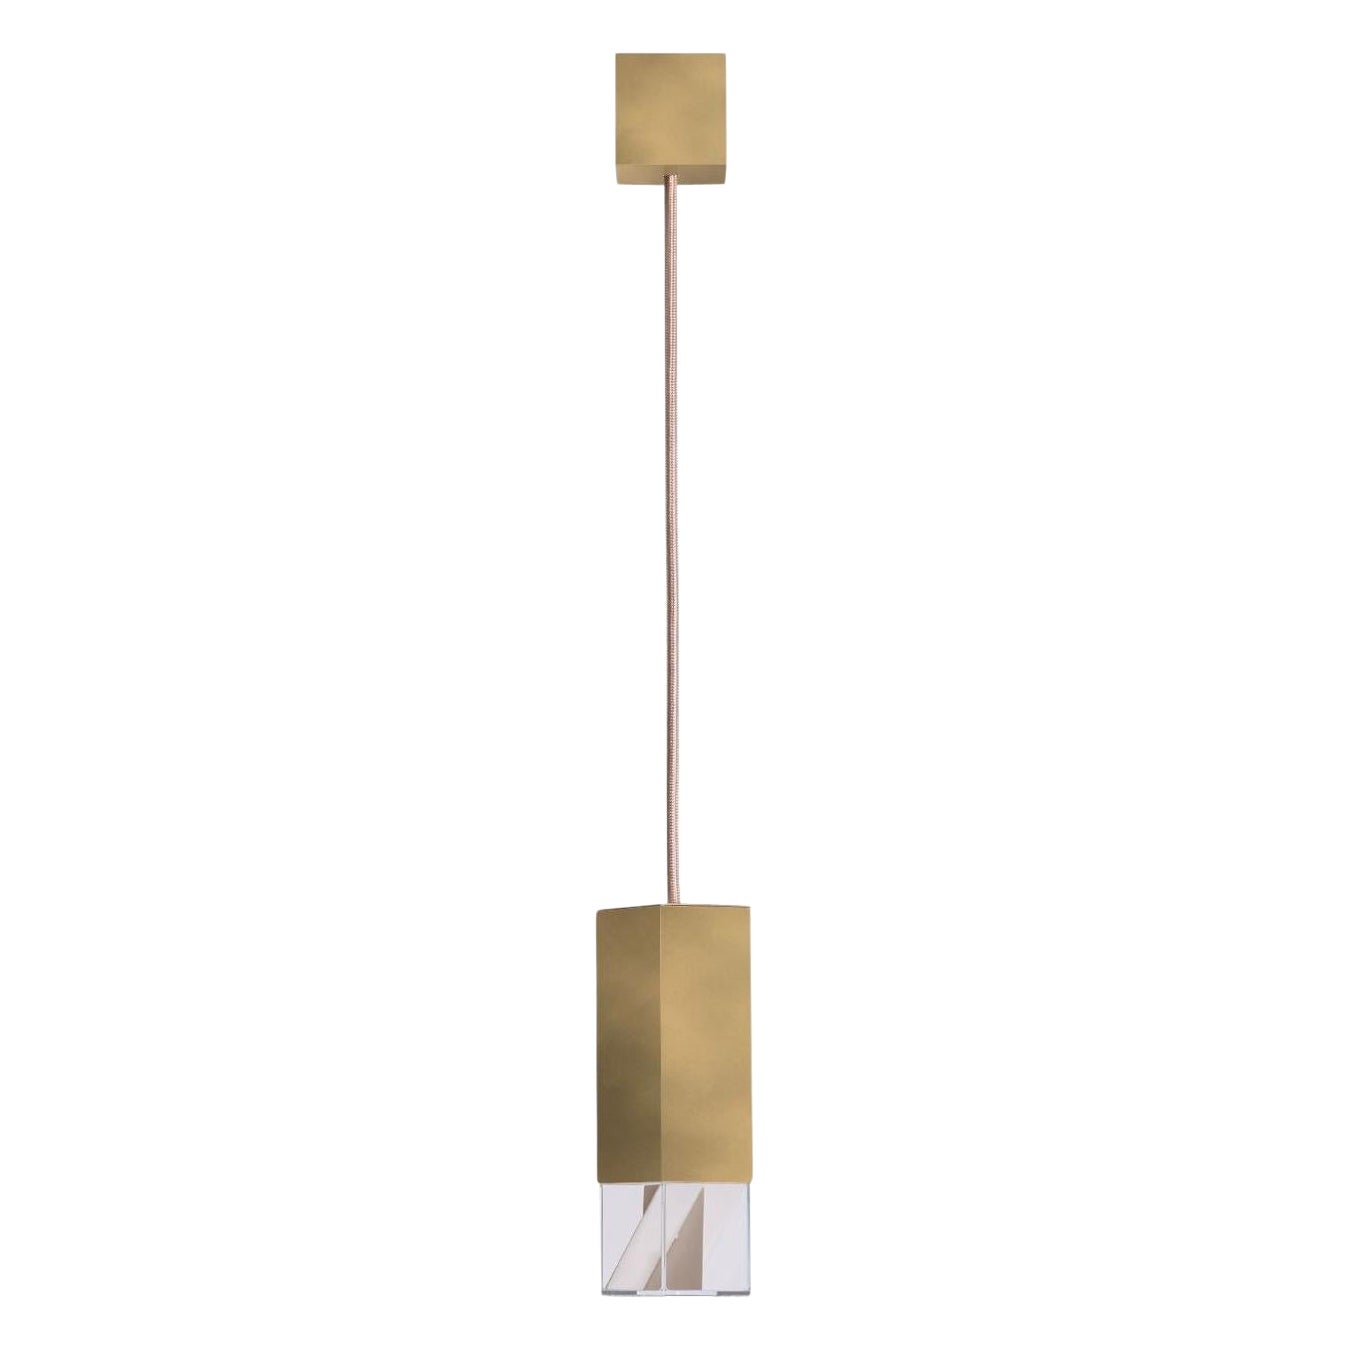 Lamp One Brass 02 Revamp Edition by Formaminima For Sale